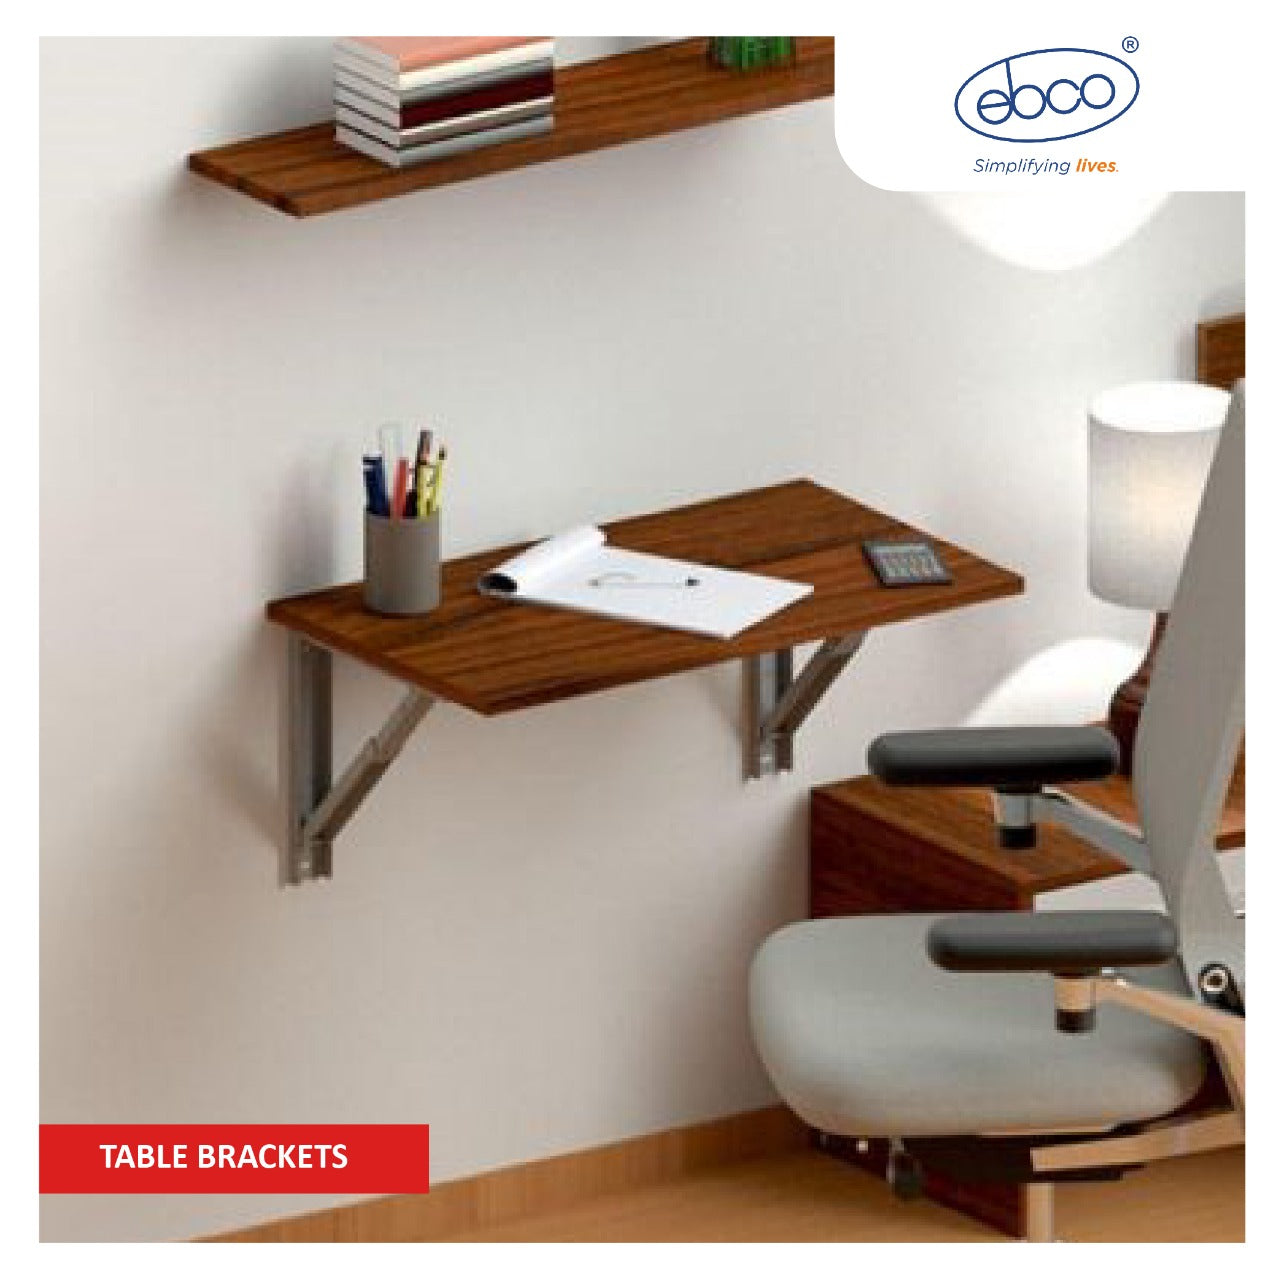 Ebco Table Brackets - M. M. Noorbhoy & Co Collection - Durable and Functional Table Brackets for Your Needs